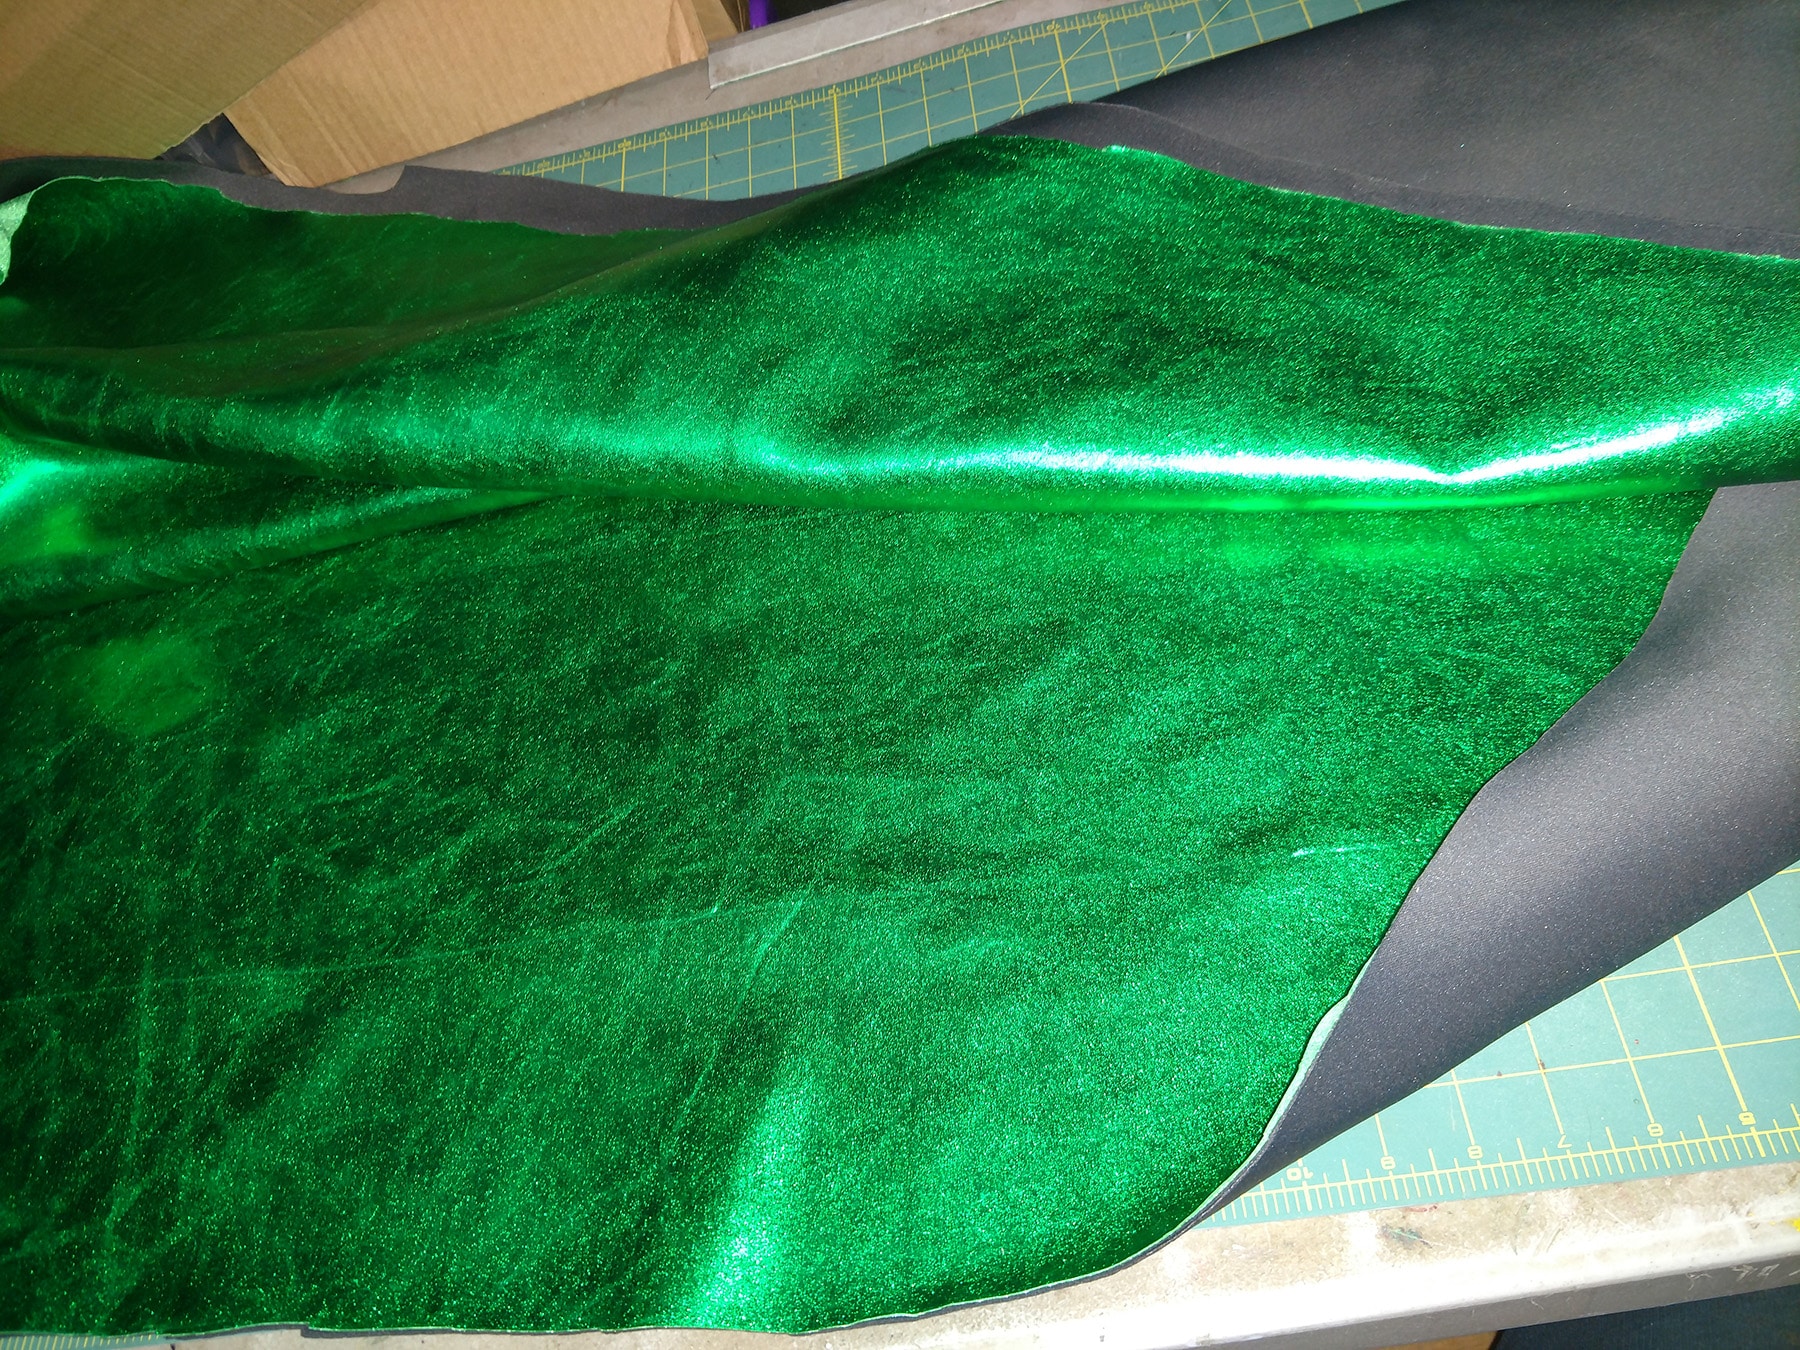 A large piece of shiny metallic green fabric. The sides are turned over, revealing grey neoprene underneath.